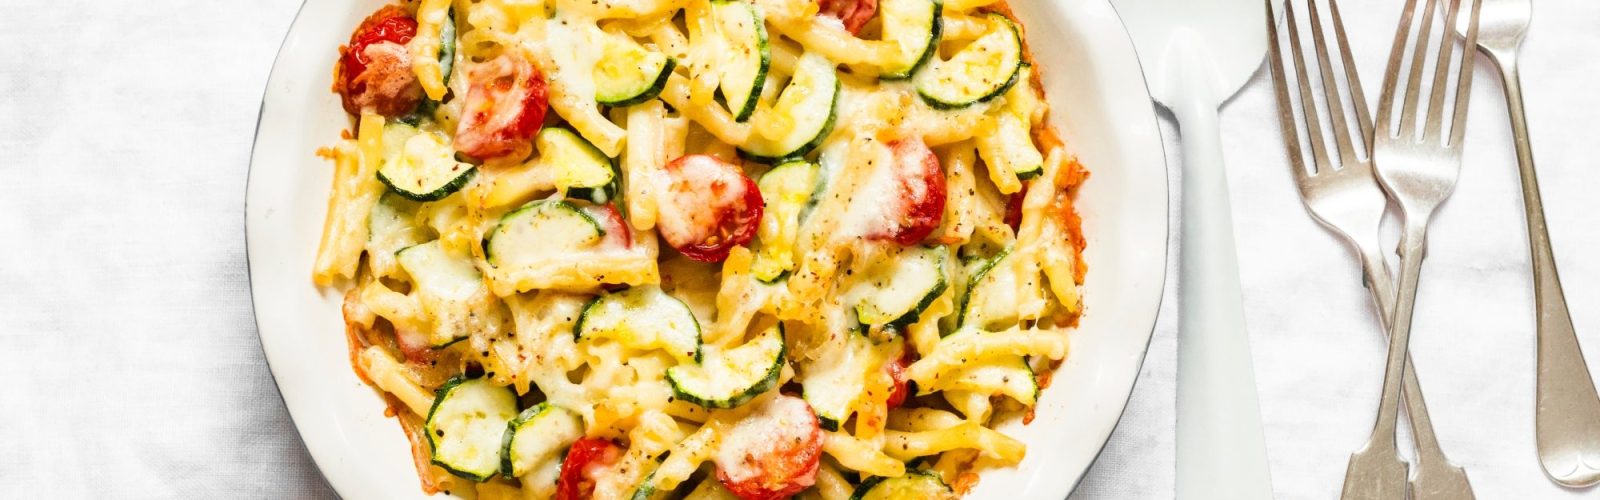 Roasted zucchini and cherry tomatoes baked mac and cheese